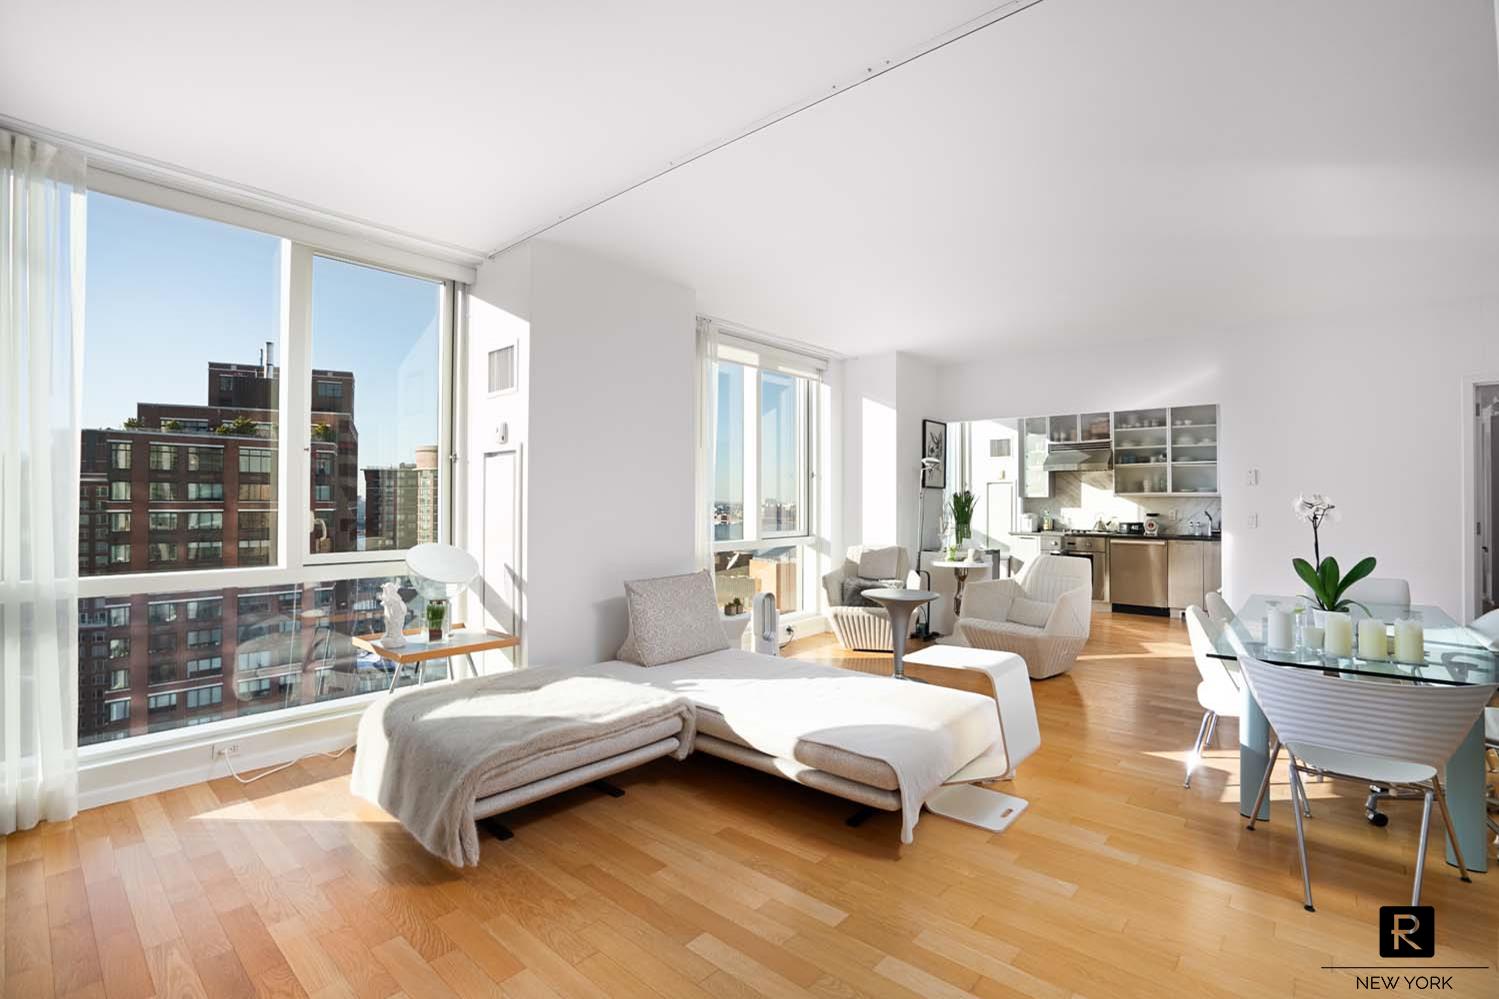 200 Chambers Street 23-B, Tribeca, Downtown, NYC - 2 Bedrooms  
2 Bathrooms  
4 Rooms - 